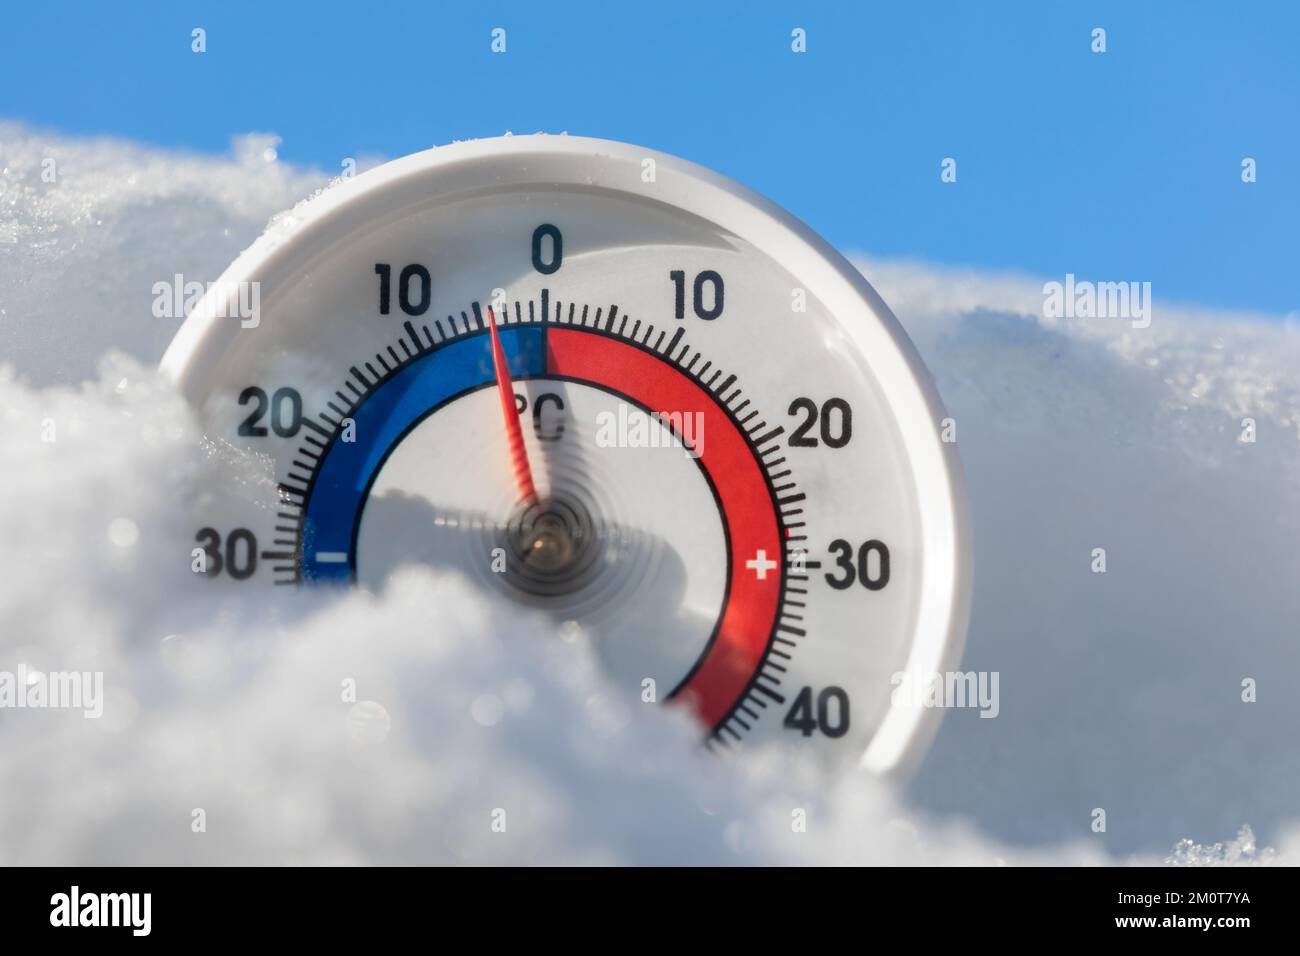 Thermometer with celsius scale in the snow showing minus 4 degree ambient temperature - winter weather concept Stock Photo